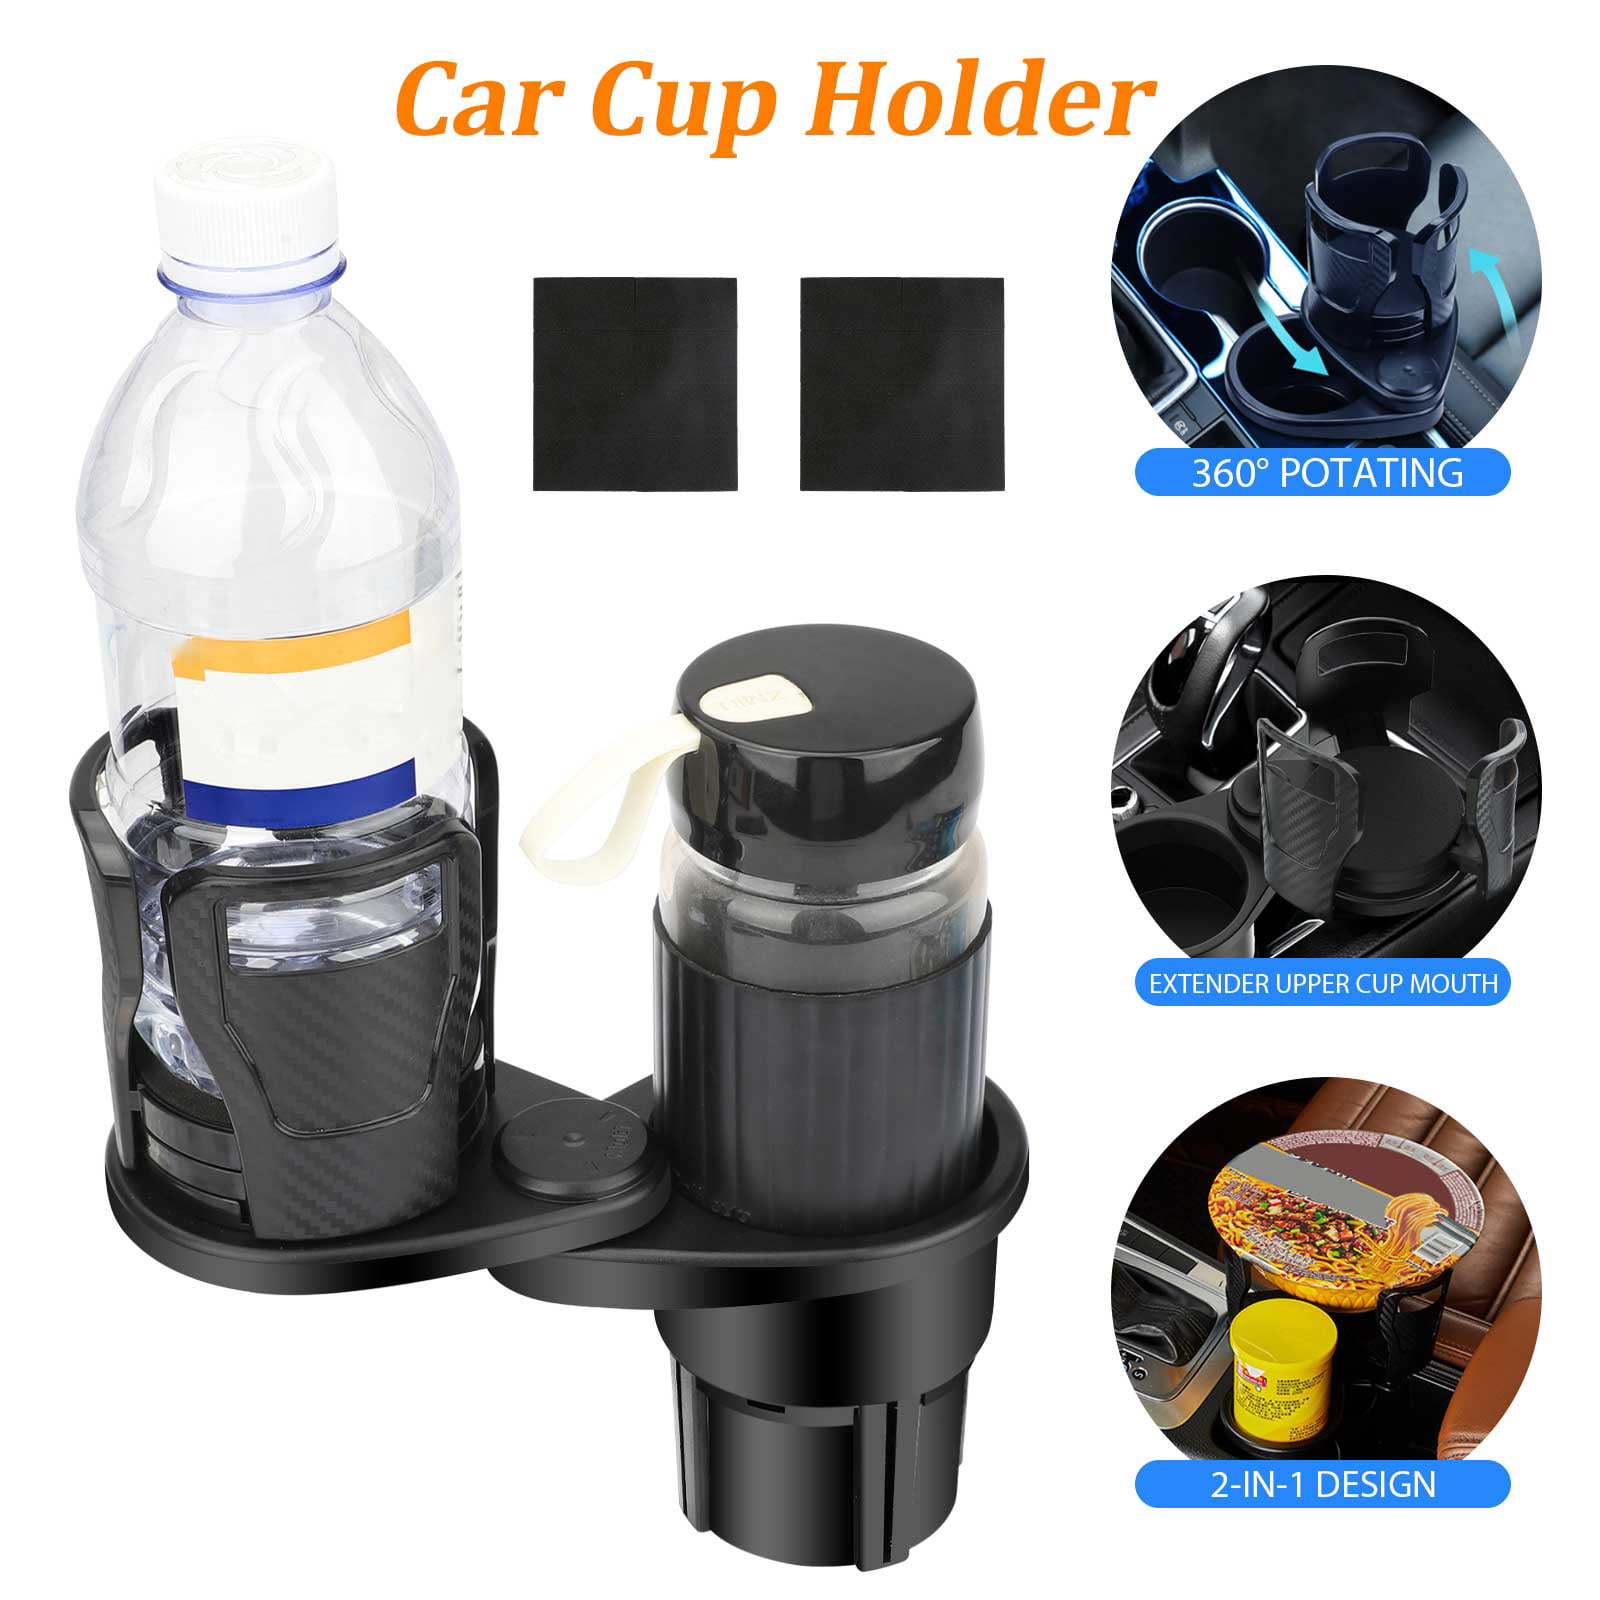 2 in 1 Multifunctional Car Cup Holder Expander Adapter with Adjustable Base,All Purpose Car Cup Holder and Organizer for Snack Bottles Cups Drinks… 